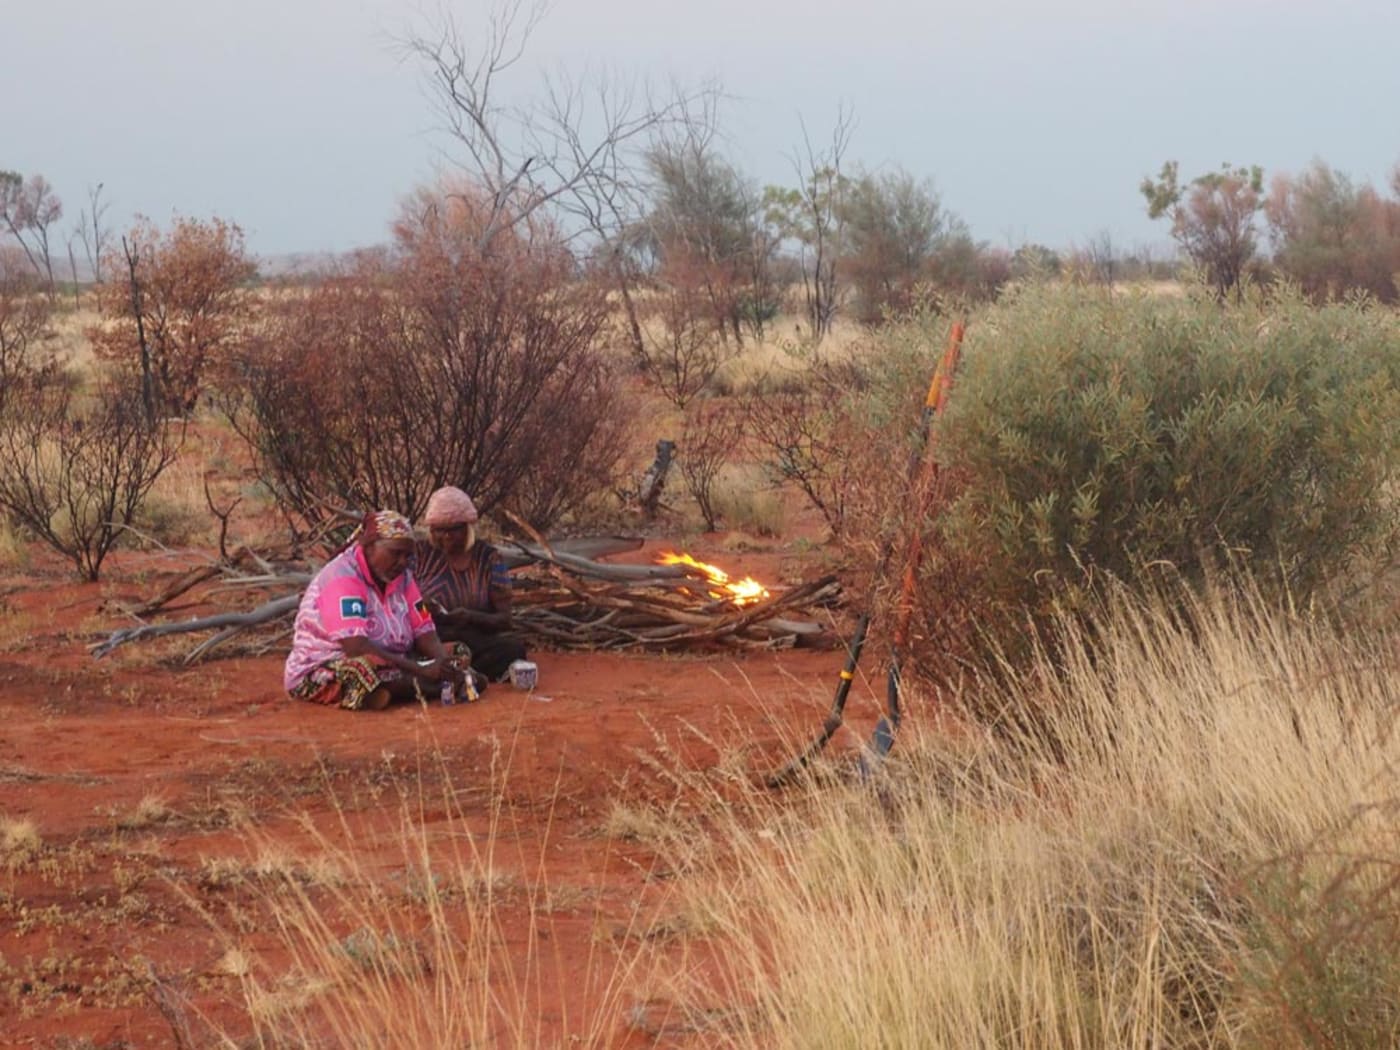 Members of the Ngaanyatjarra community sharing stories of walking the country